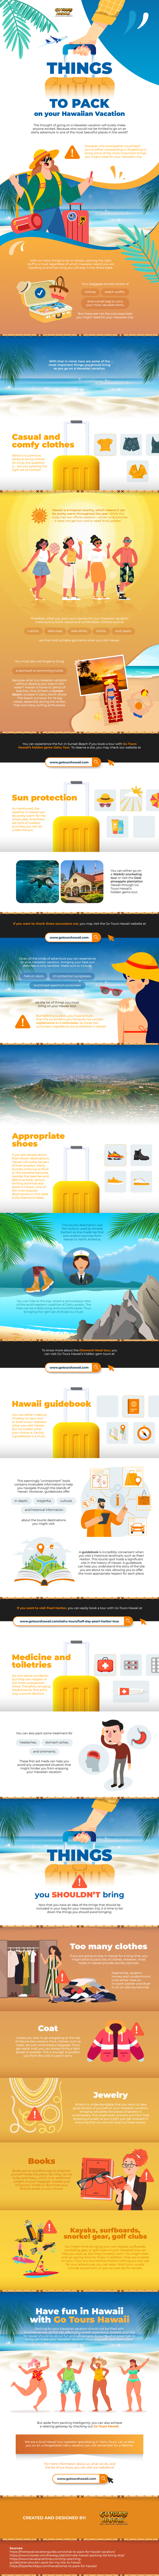 Things-to-Pack-on-your-Hawaiian-Vacation-01-infographic-image-0